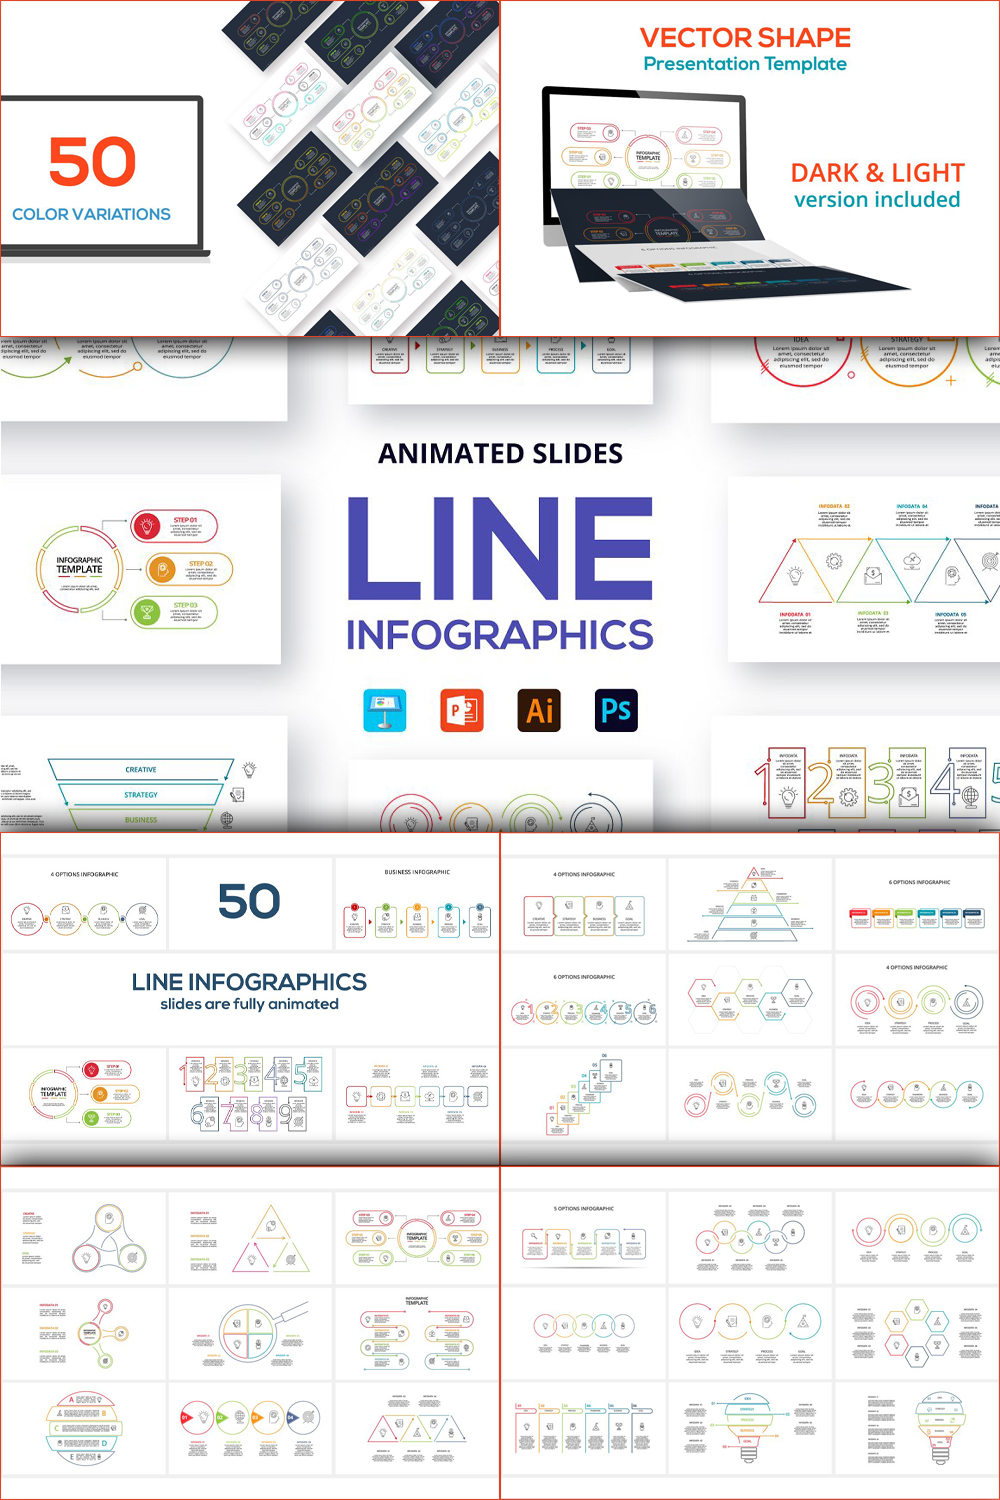 Line animated infographics of pinterest.